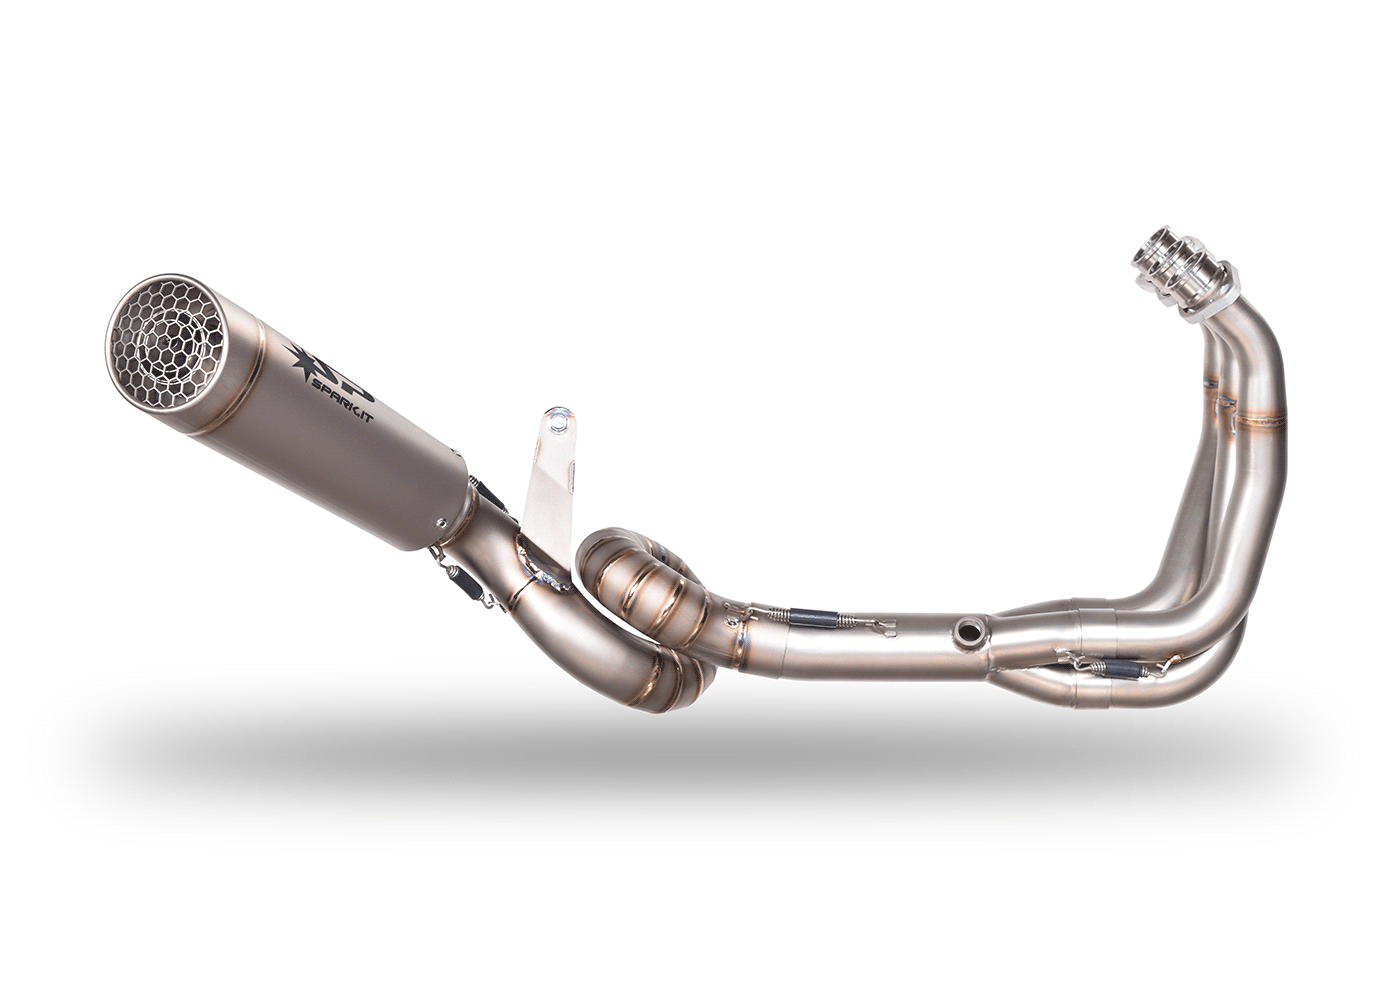 Full exhaust system with welded collector for Yamaha Tracer 900